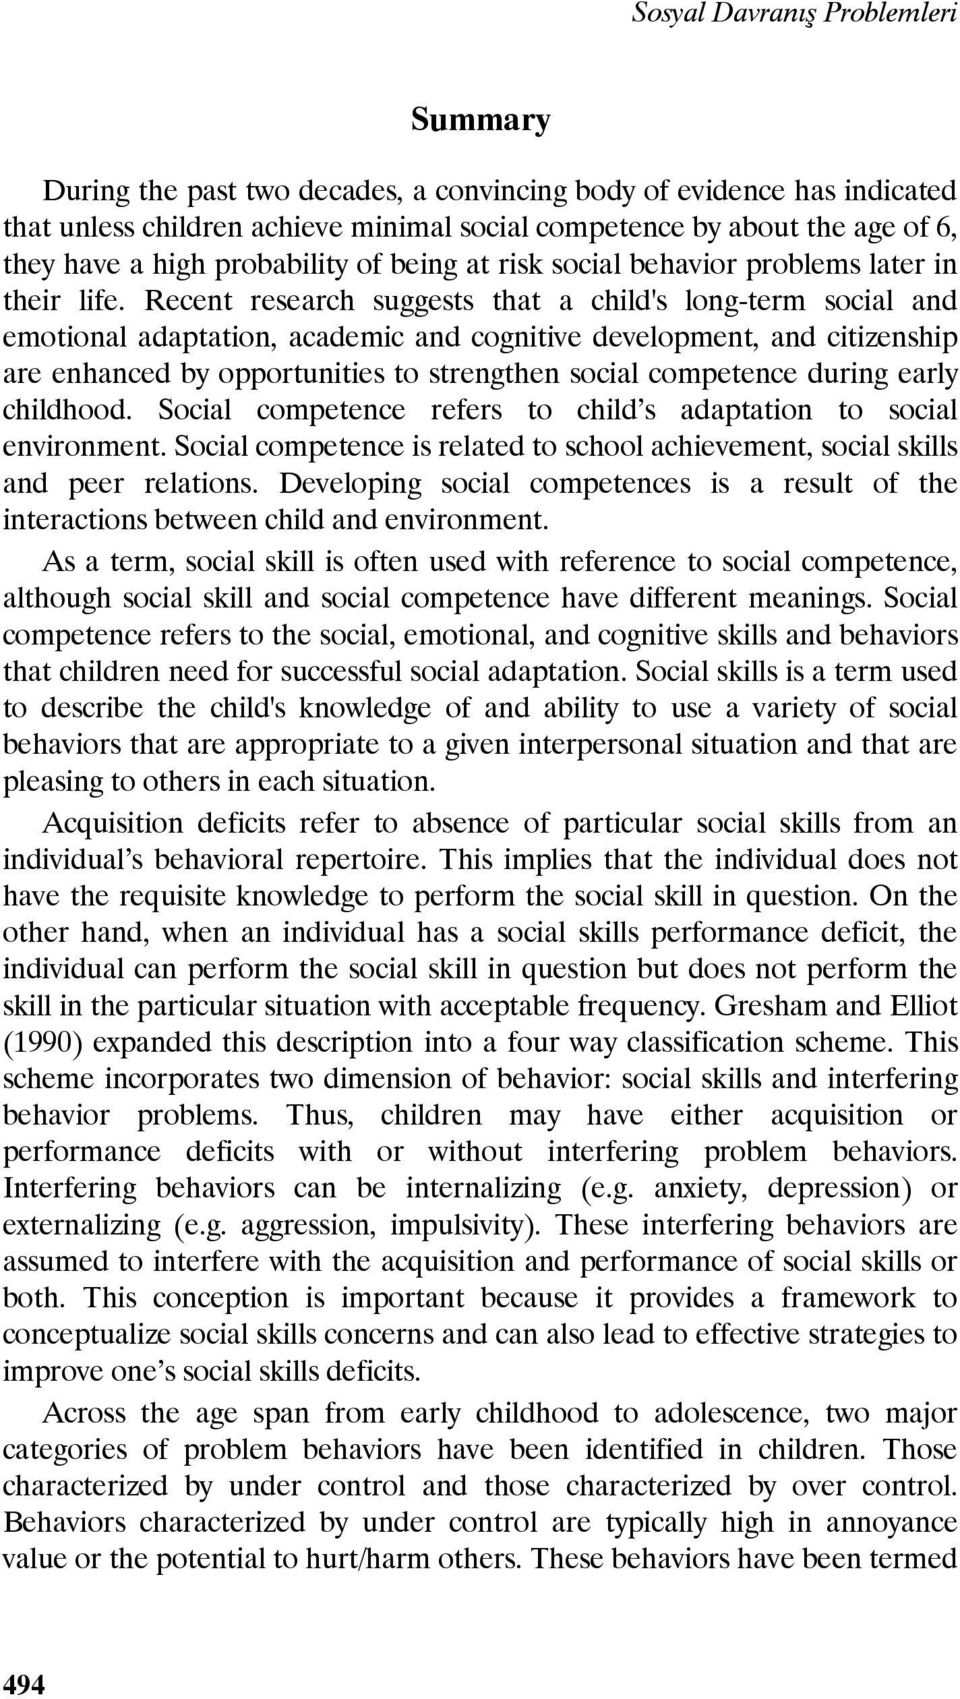 Recent research suggests that a child's long-term social and emotional adaptation, academic and cognitive development, and citizenship are enhanced by opportunities to strengthen social competence